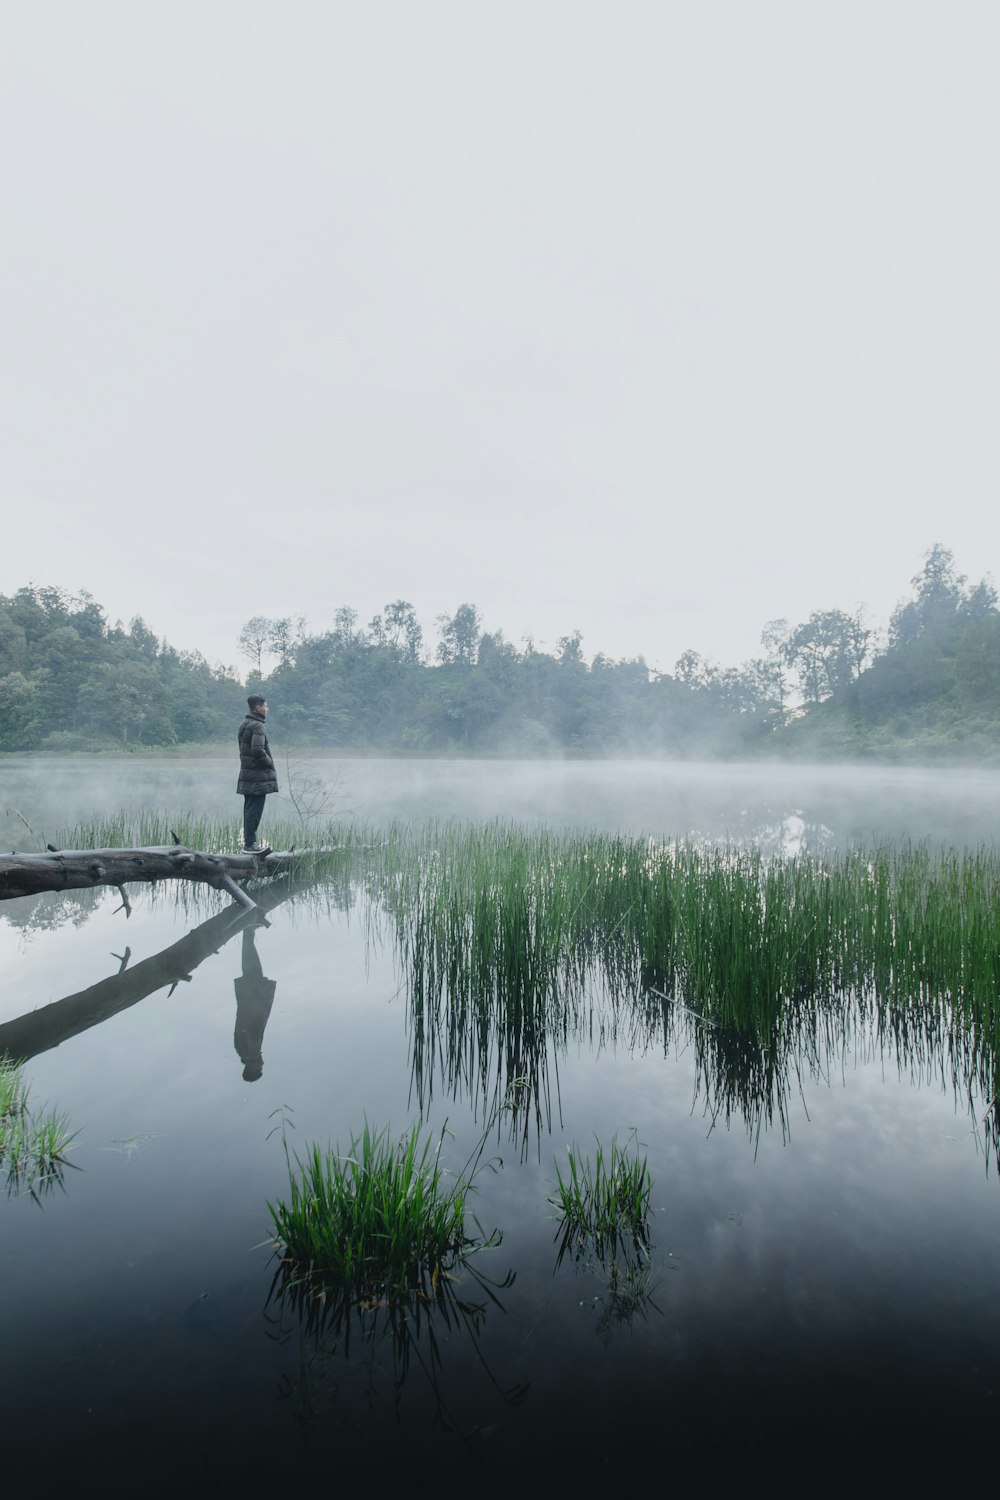 man in black jacket standing on brown wooden dock over body of water during foggy weather